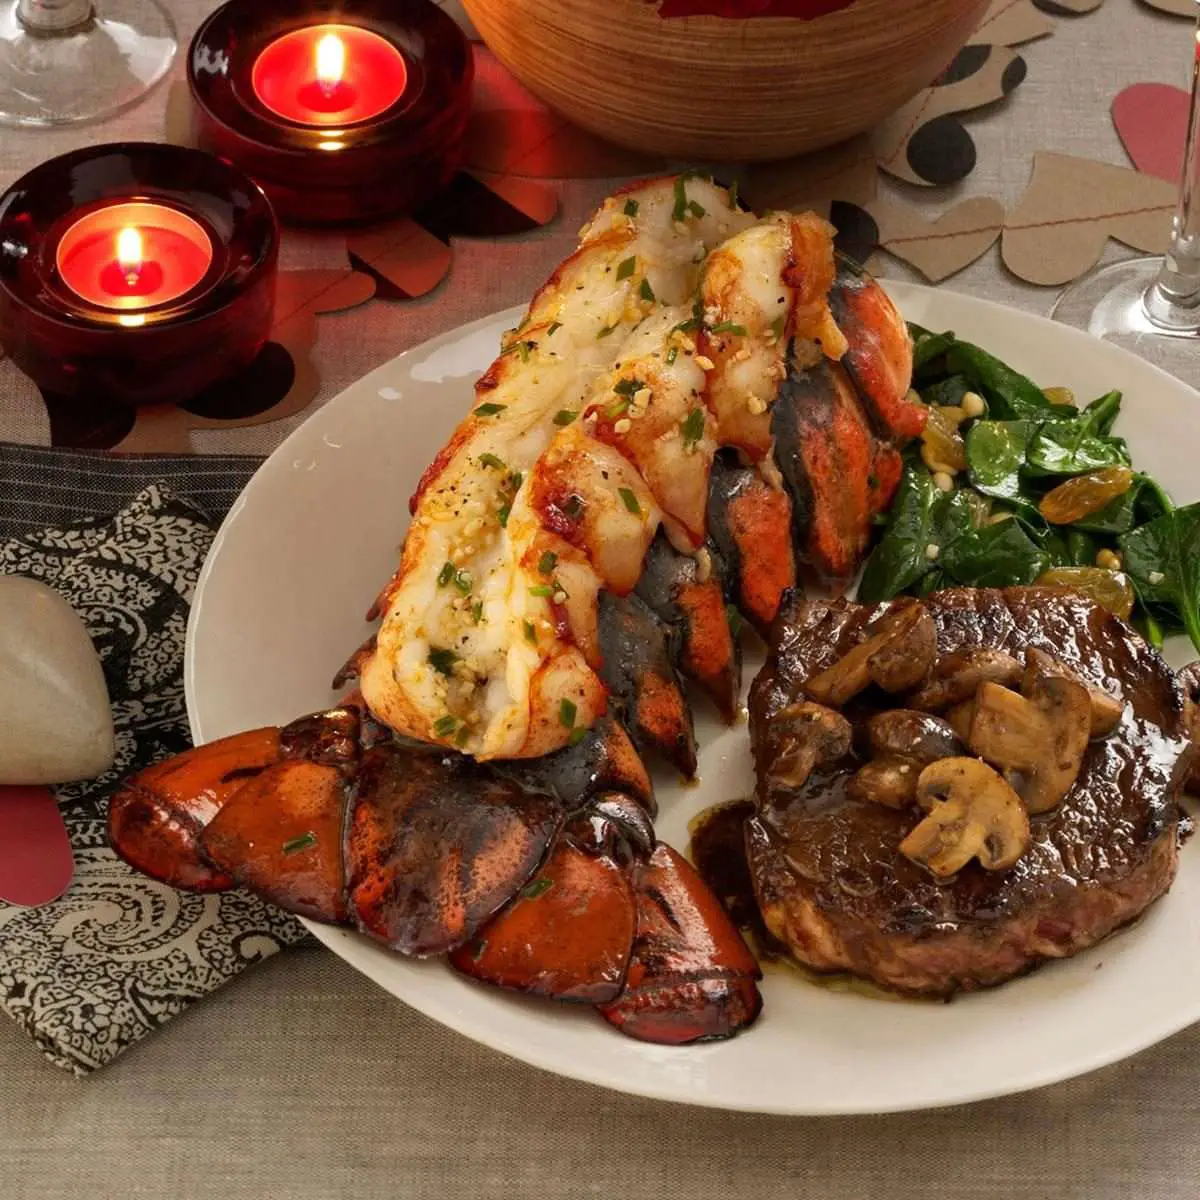 Grilled Lobster Tails Recipe